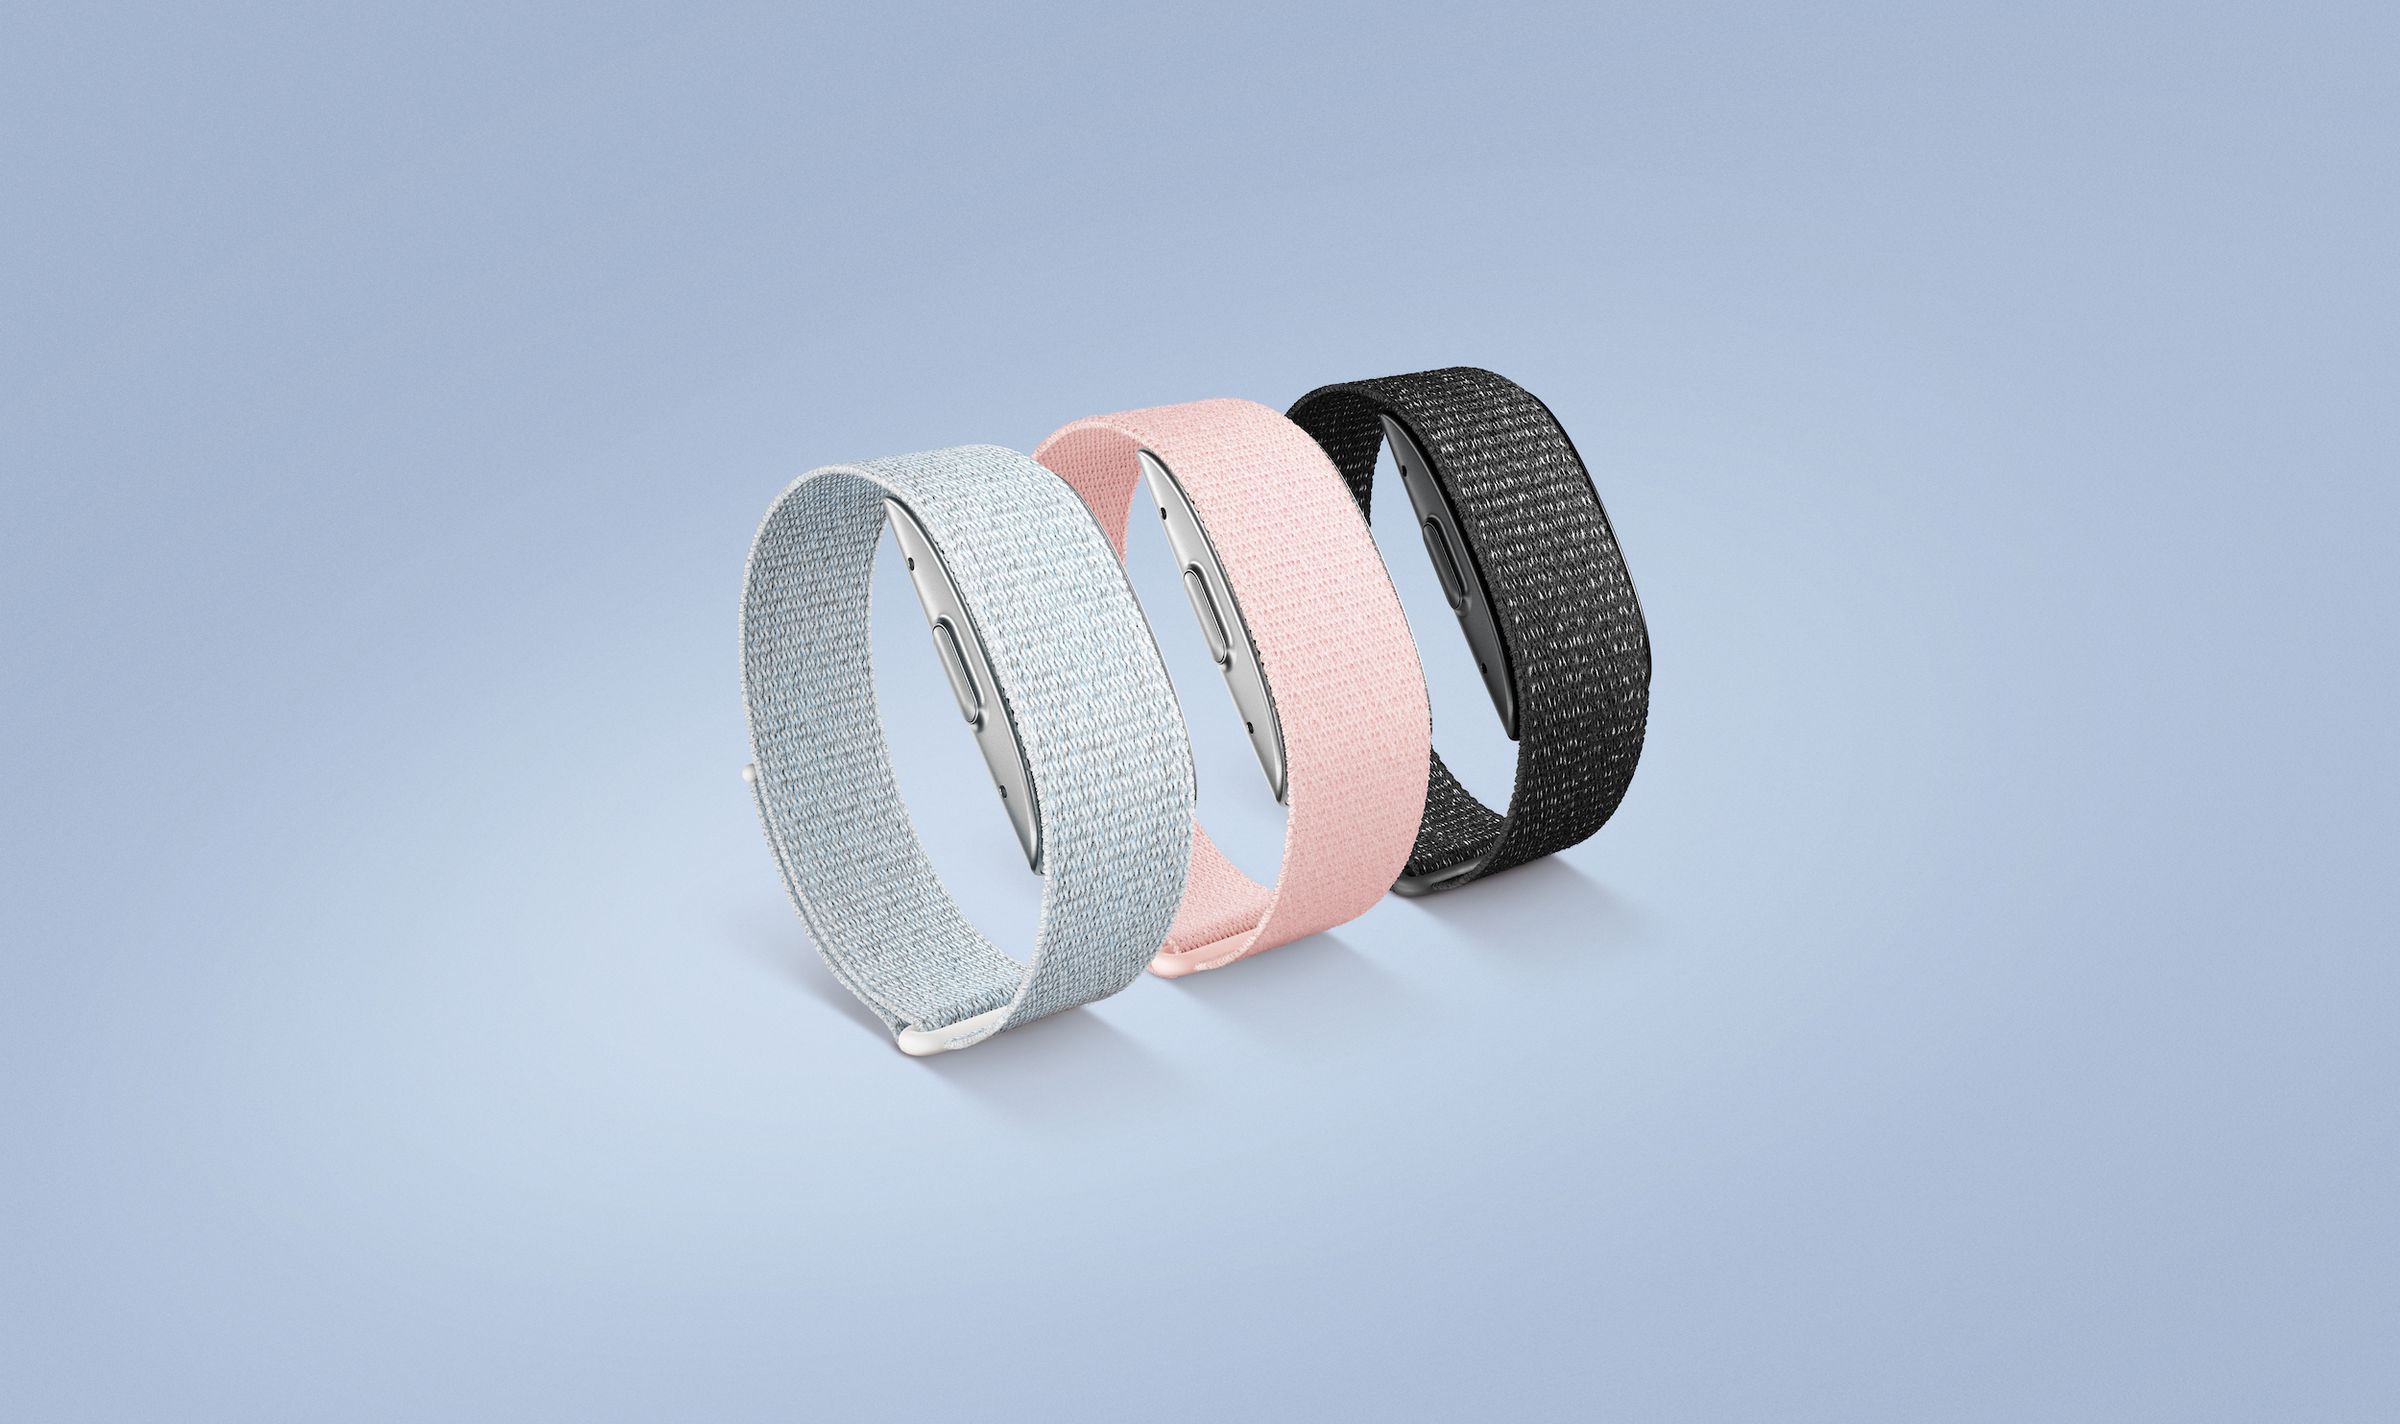 The three color options for the Halo Band